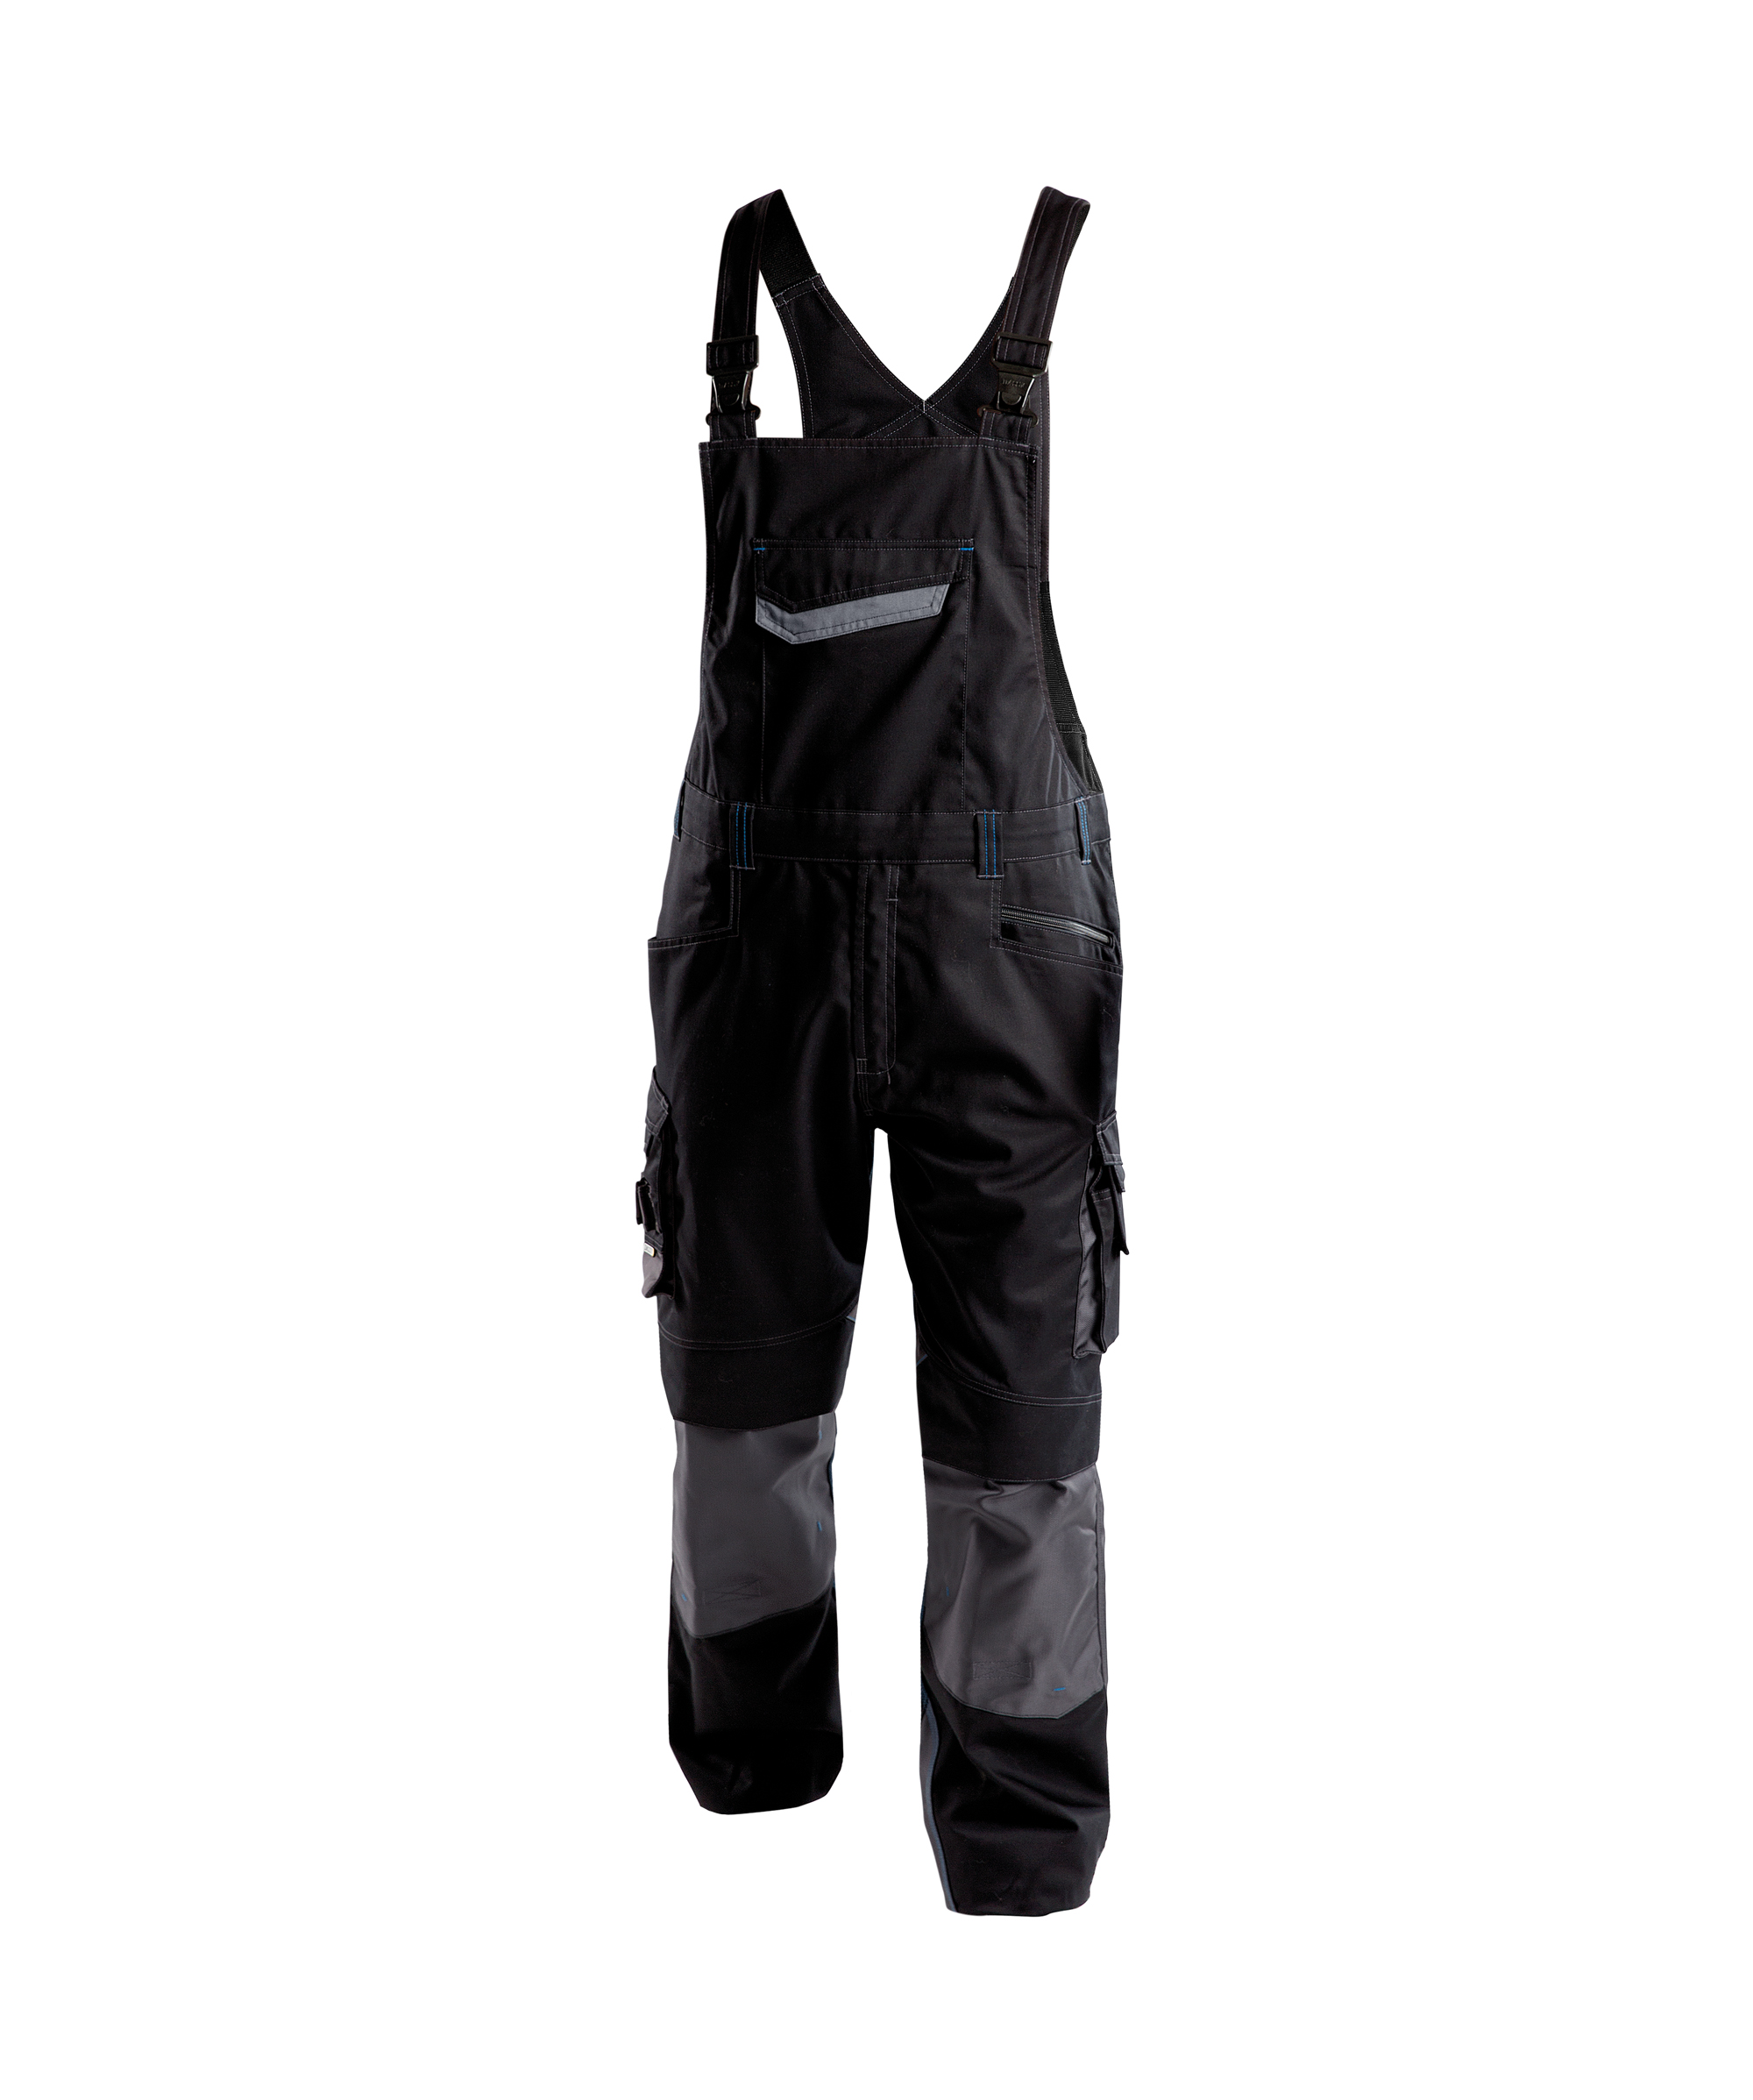 voltic_two-tone-brace-overall-with-knee-pockets_black-anthracite-grey_front.jpg